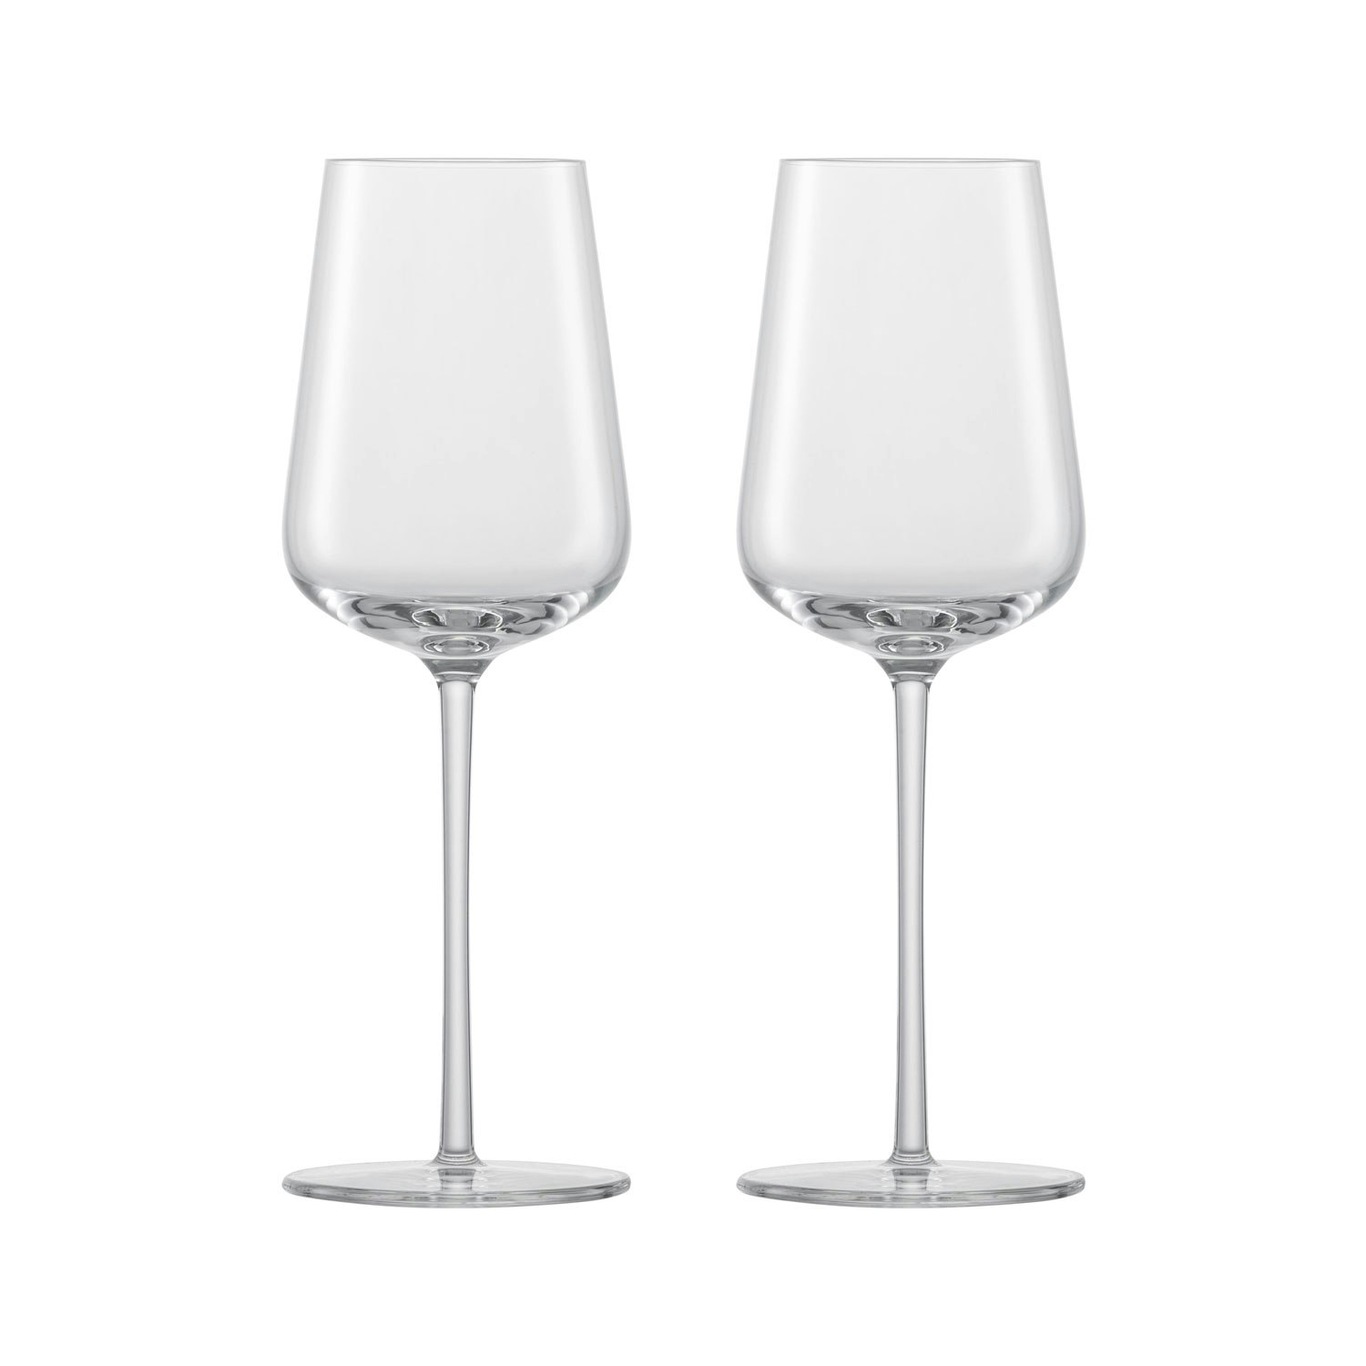 https://royaldesign.com/image/2/zwiesel-vervino-sweet-wine-glass-29-cl-2-pack-0?w=800&quality=80